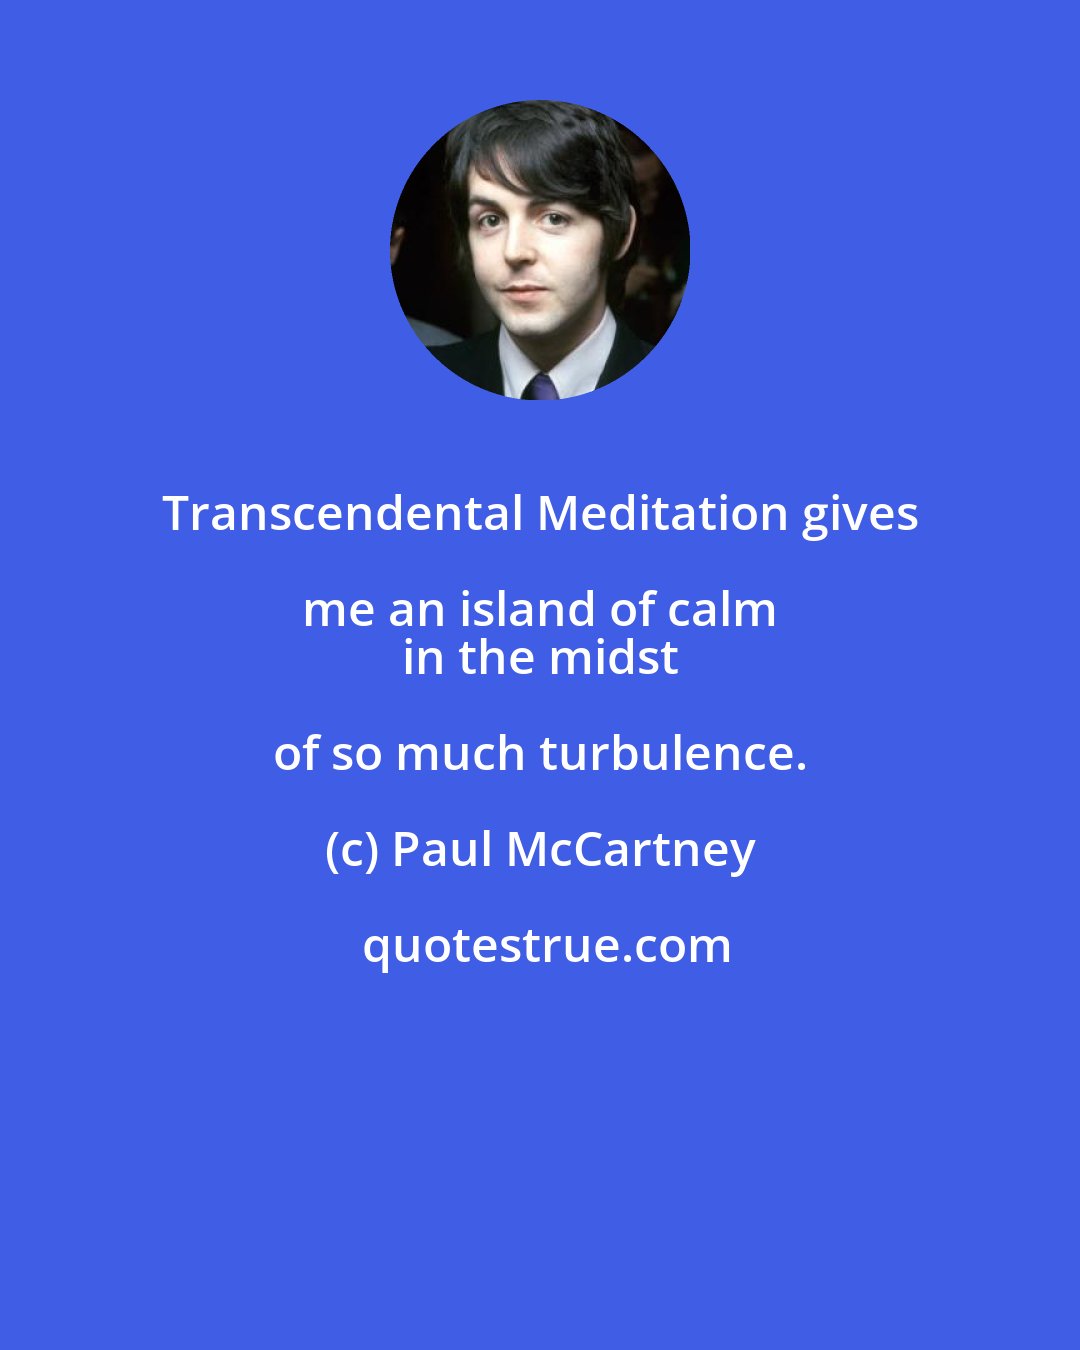 Paul McCartney: Transcendental Meditation gives me an island of calm 
 in the midst of so much turbulence.